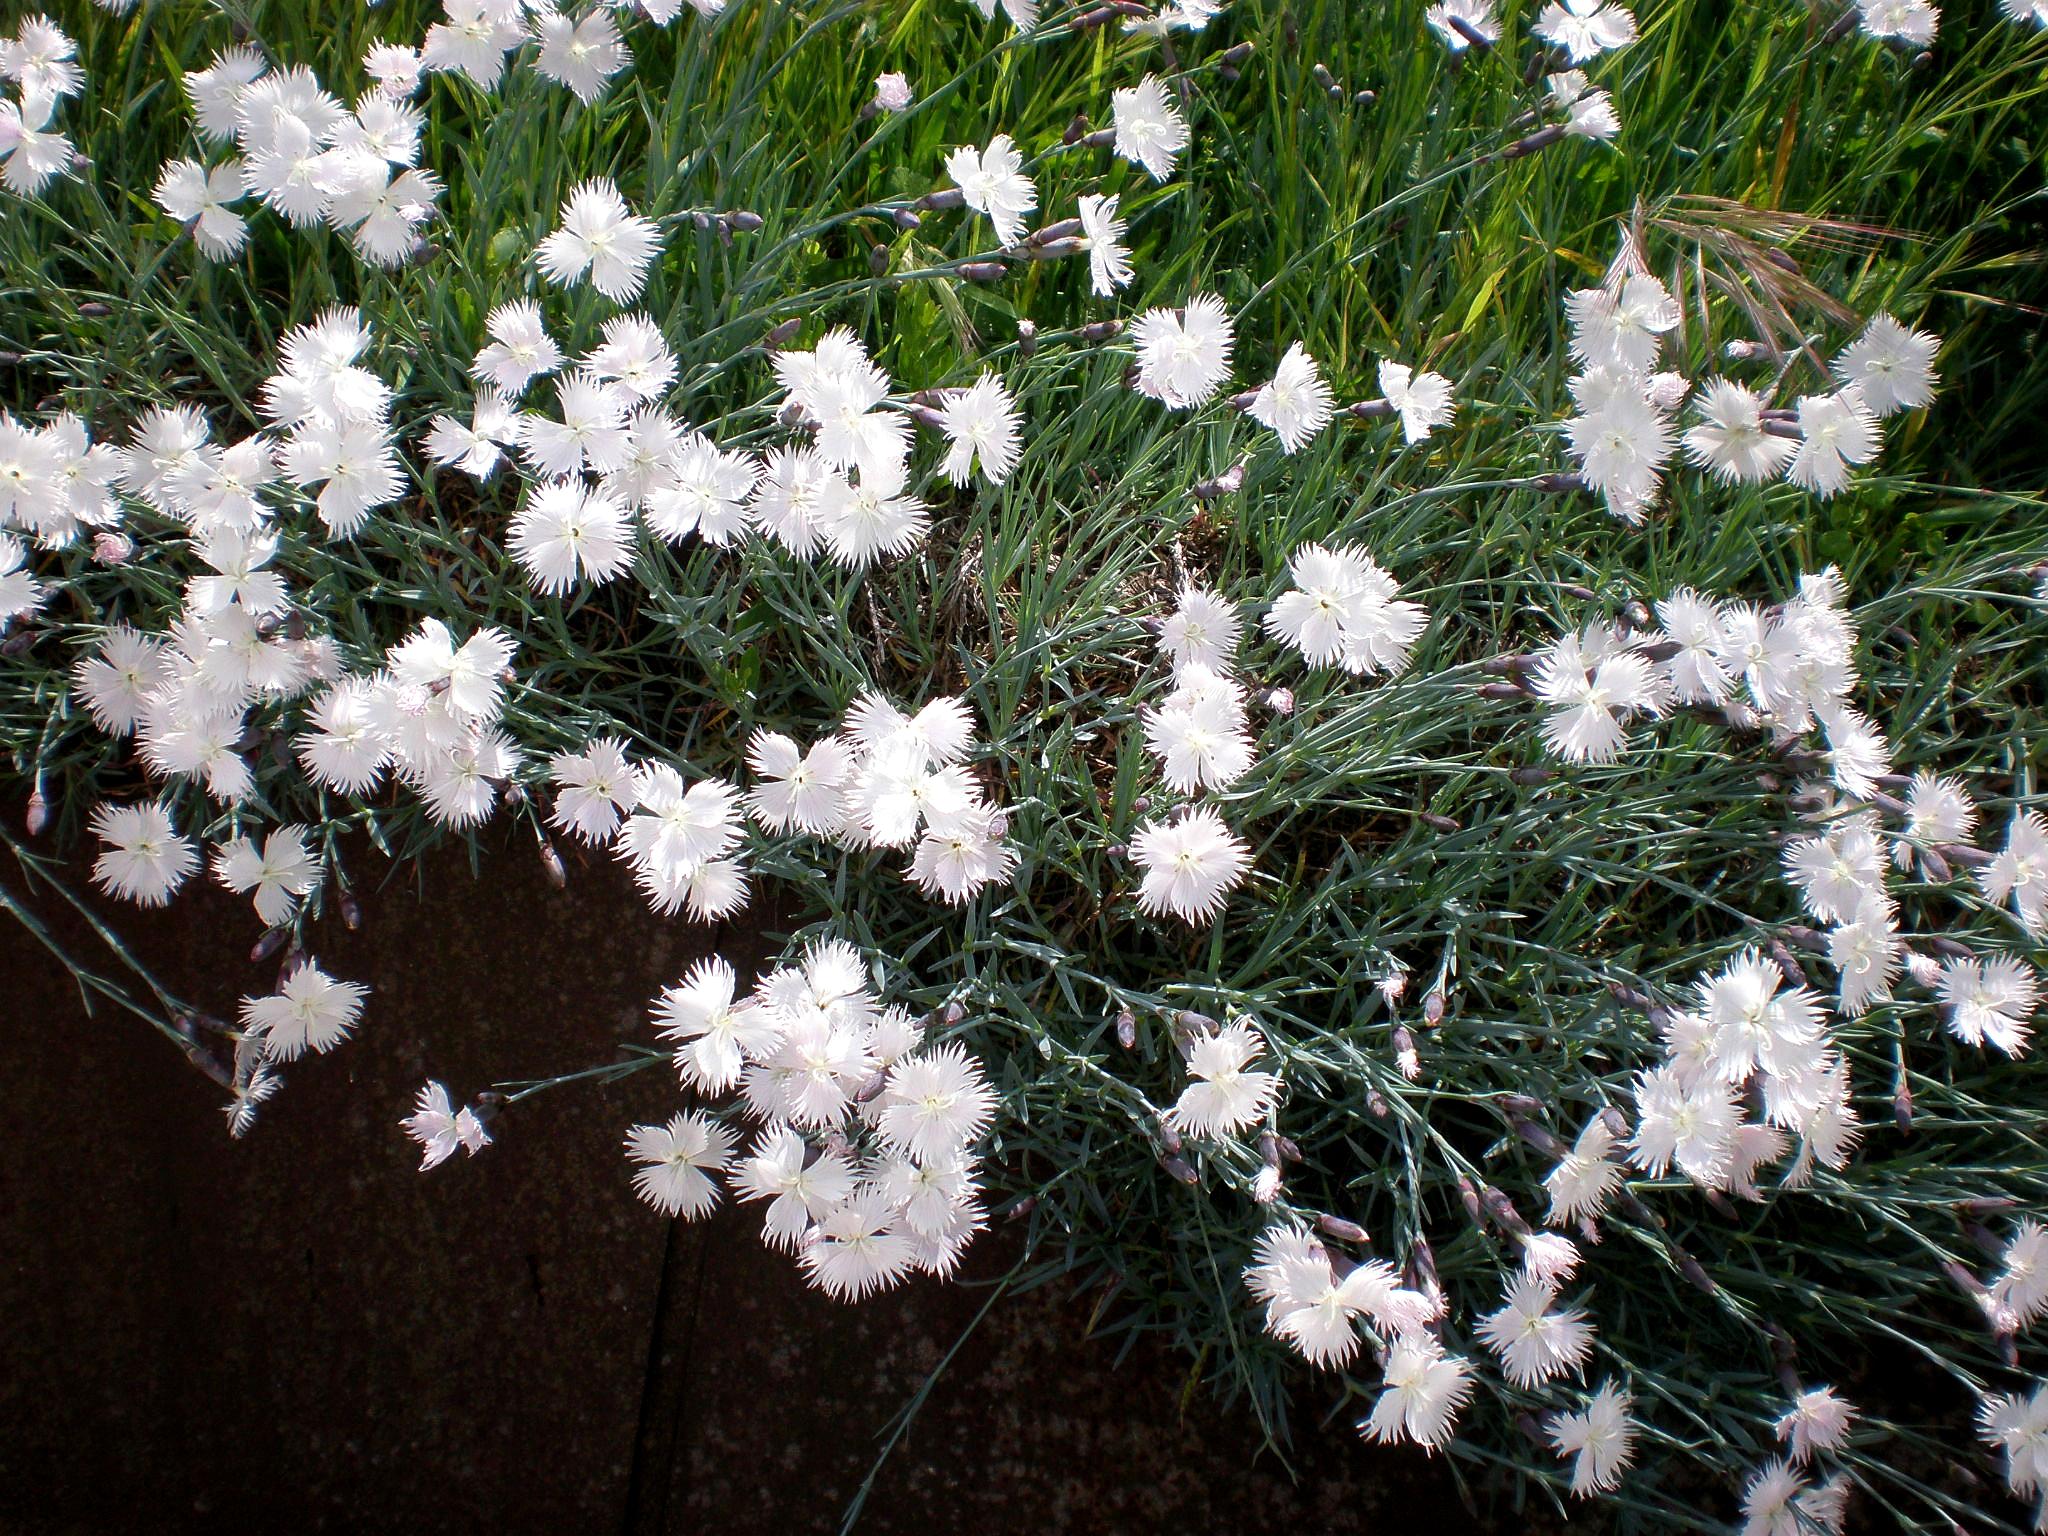 white flowers with white stamens, green stems and foliage
